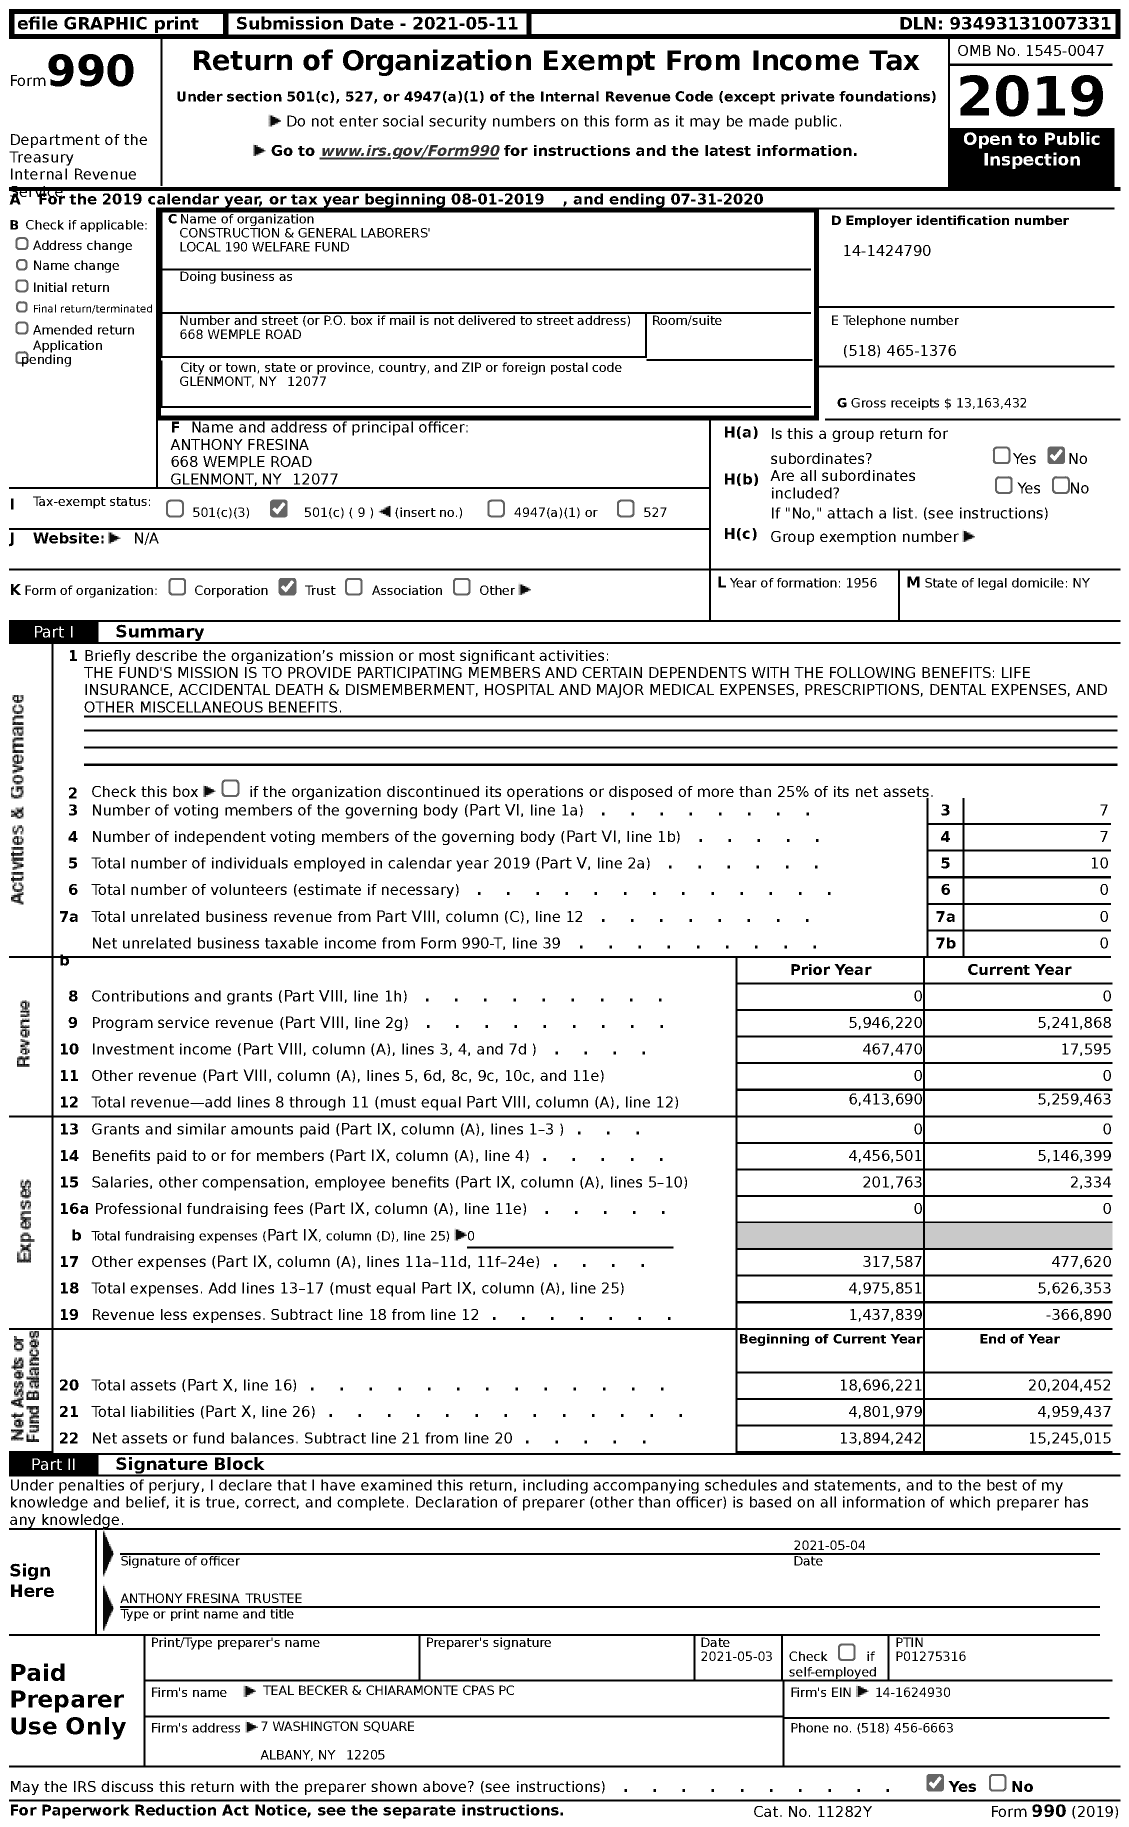 Image of first page of 2019 Form 990 for Construction and General Laborers' Local 190 Welfare Fund